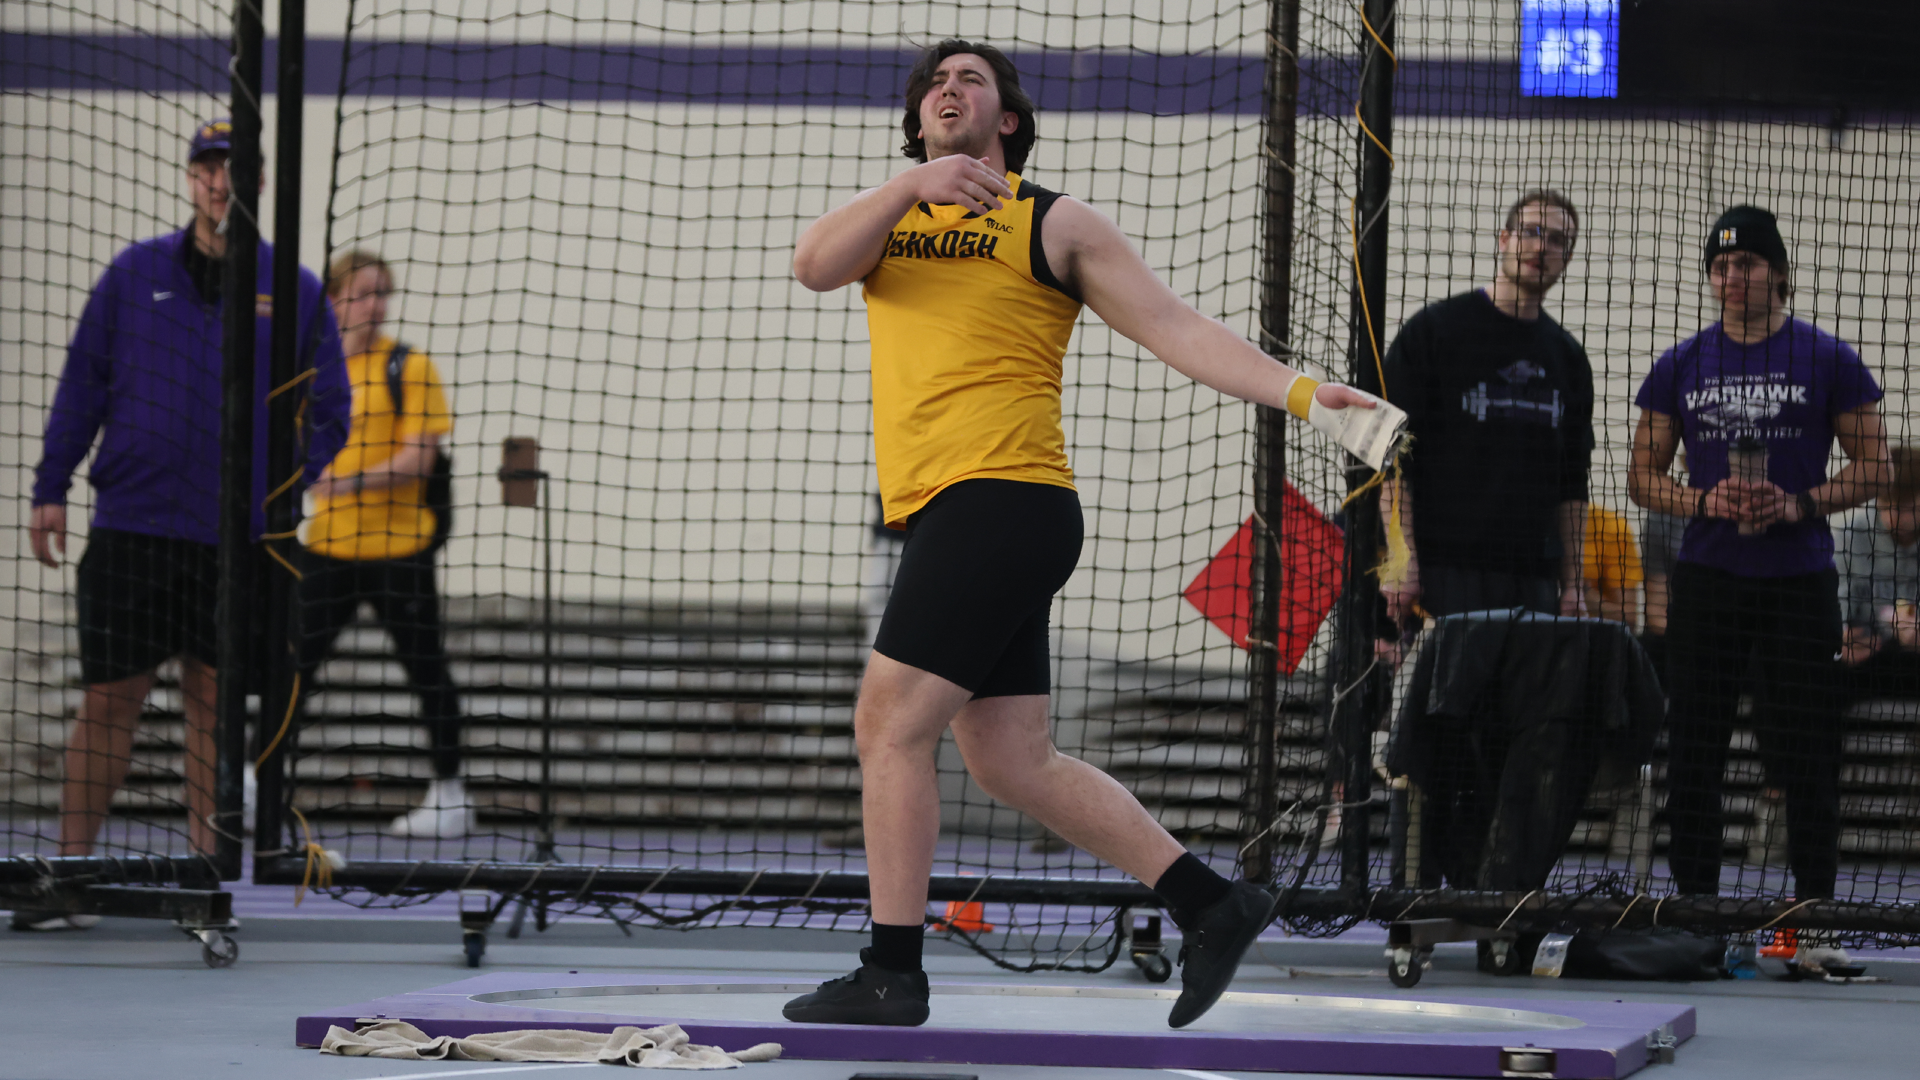 Gavin Fritsch won the weight throw and took fourth in the shot put at the Ripon Final Qualifier. Photo Credit: Steve Frommell, UW-Oshkosh Sports Information